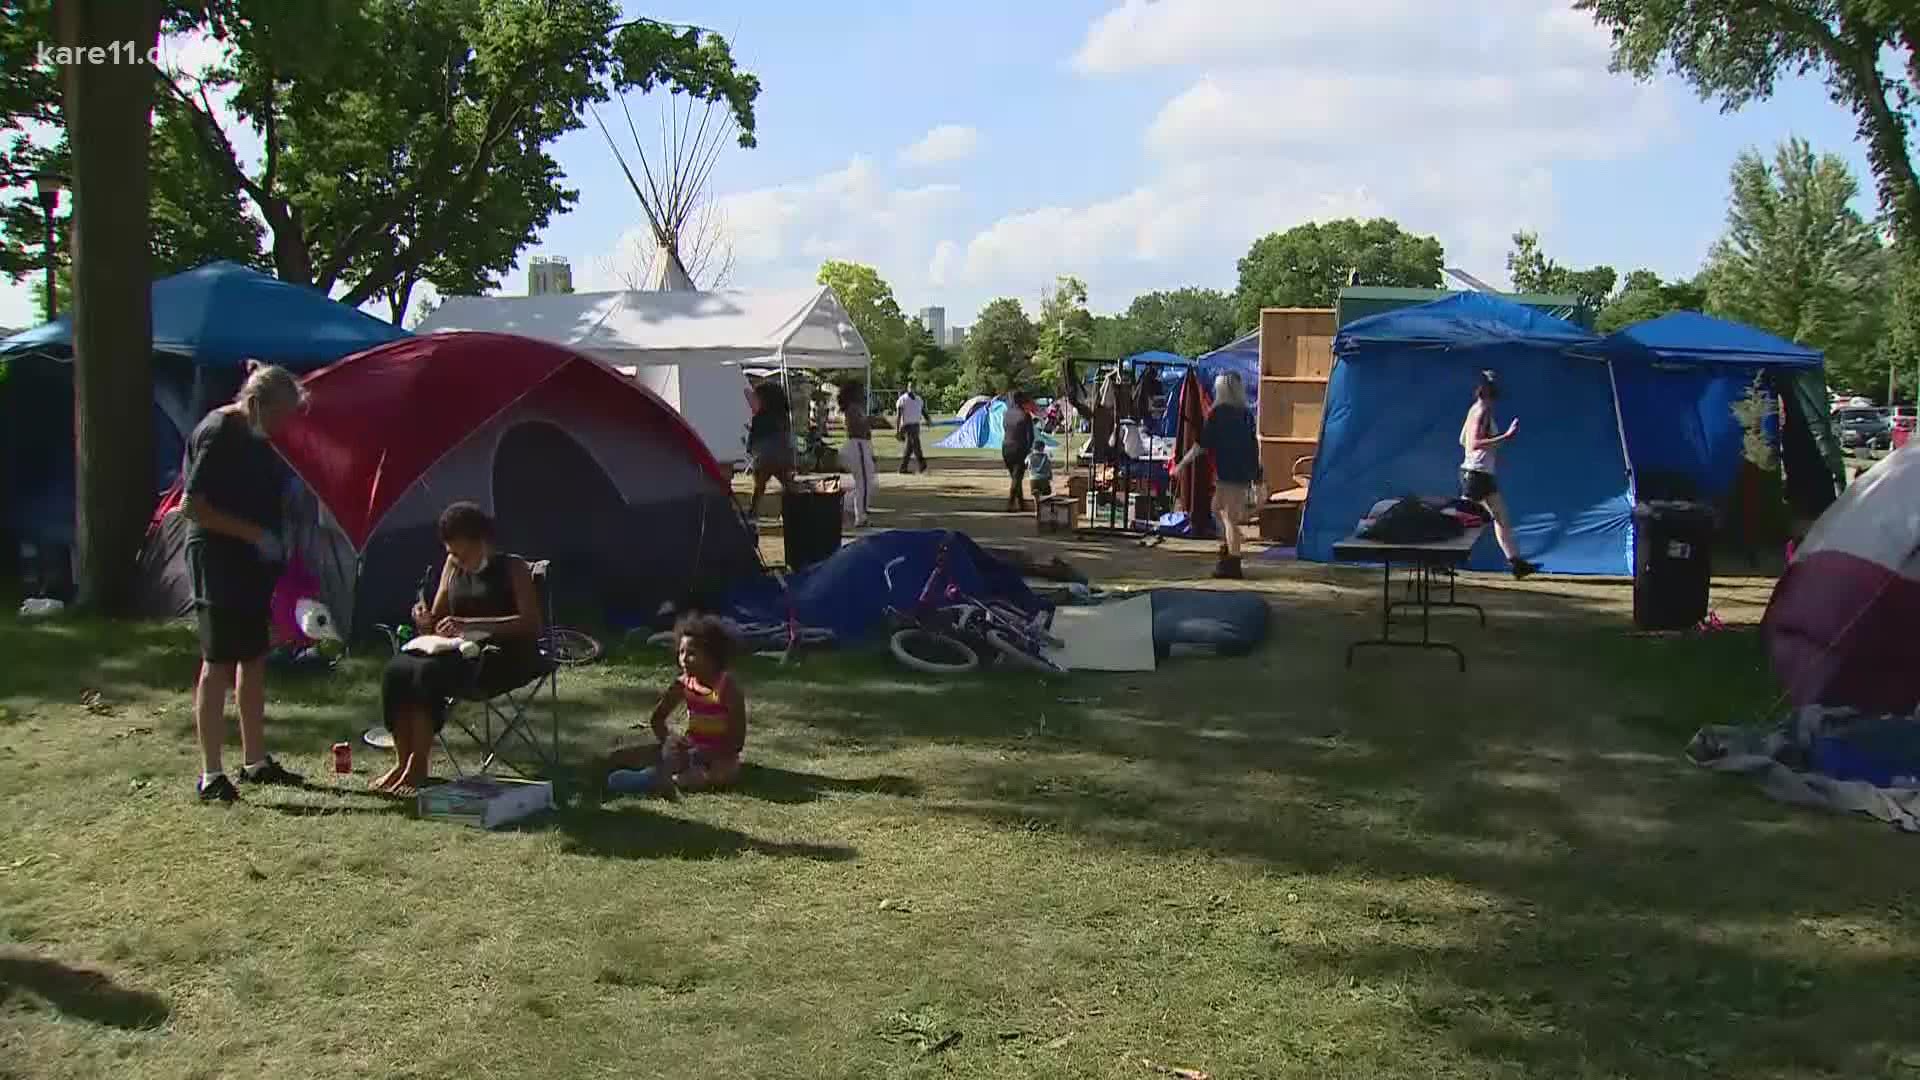 The camp has grown to more than 300 residents living in the park over the past few weeks.